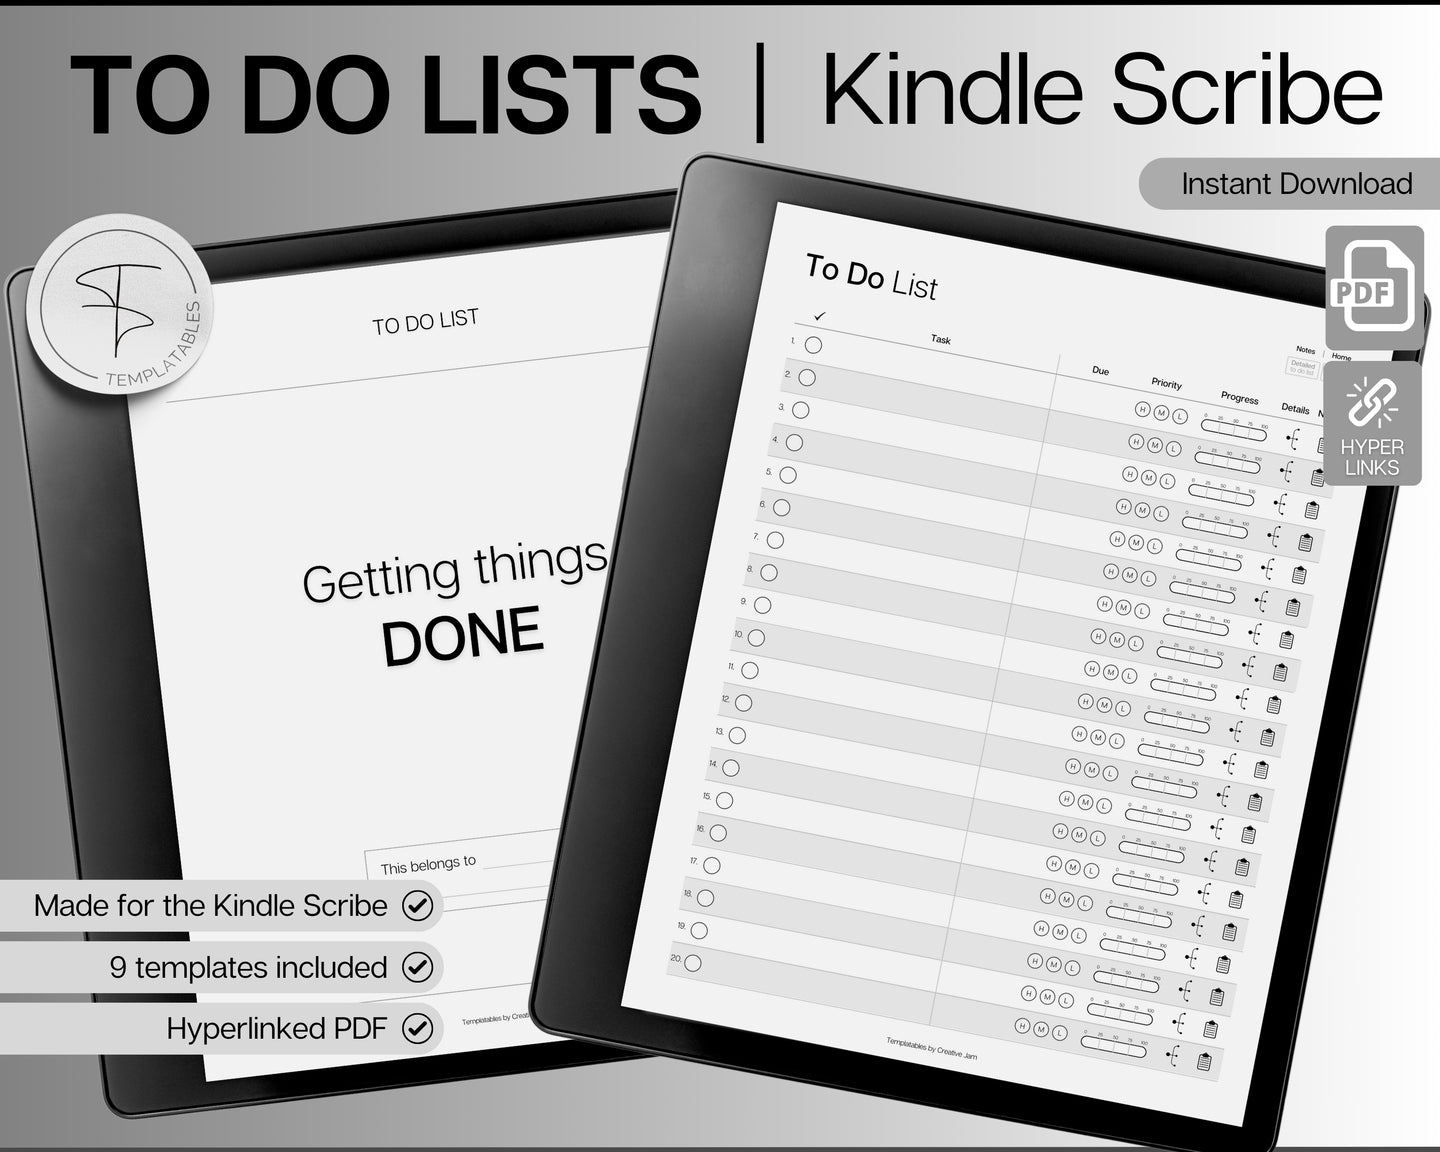 Kindle Scribe To Do List templates | Digital TO DO LISTS with 9 hyperlinked Kindle Scribe templates, Weekly planner, Daily Calendar, adhd to do list & tasks| Mono